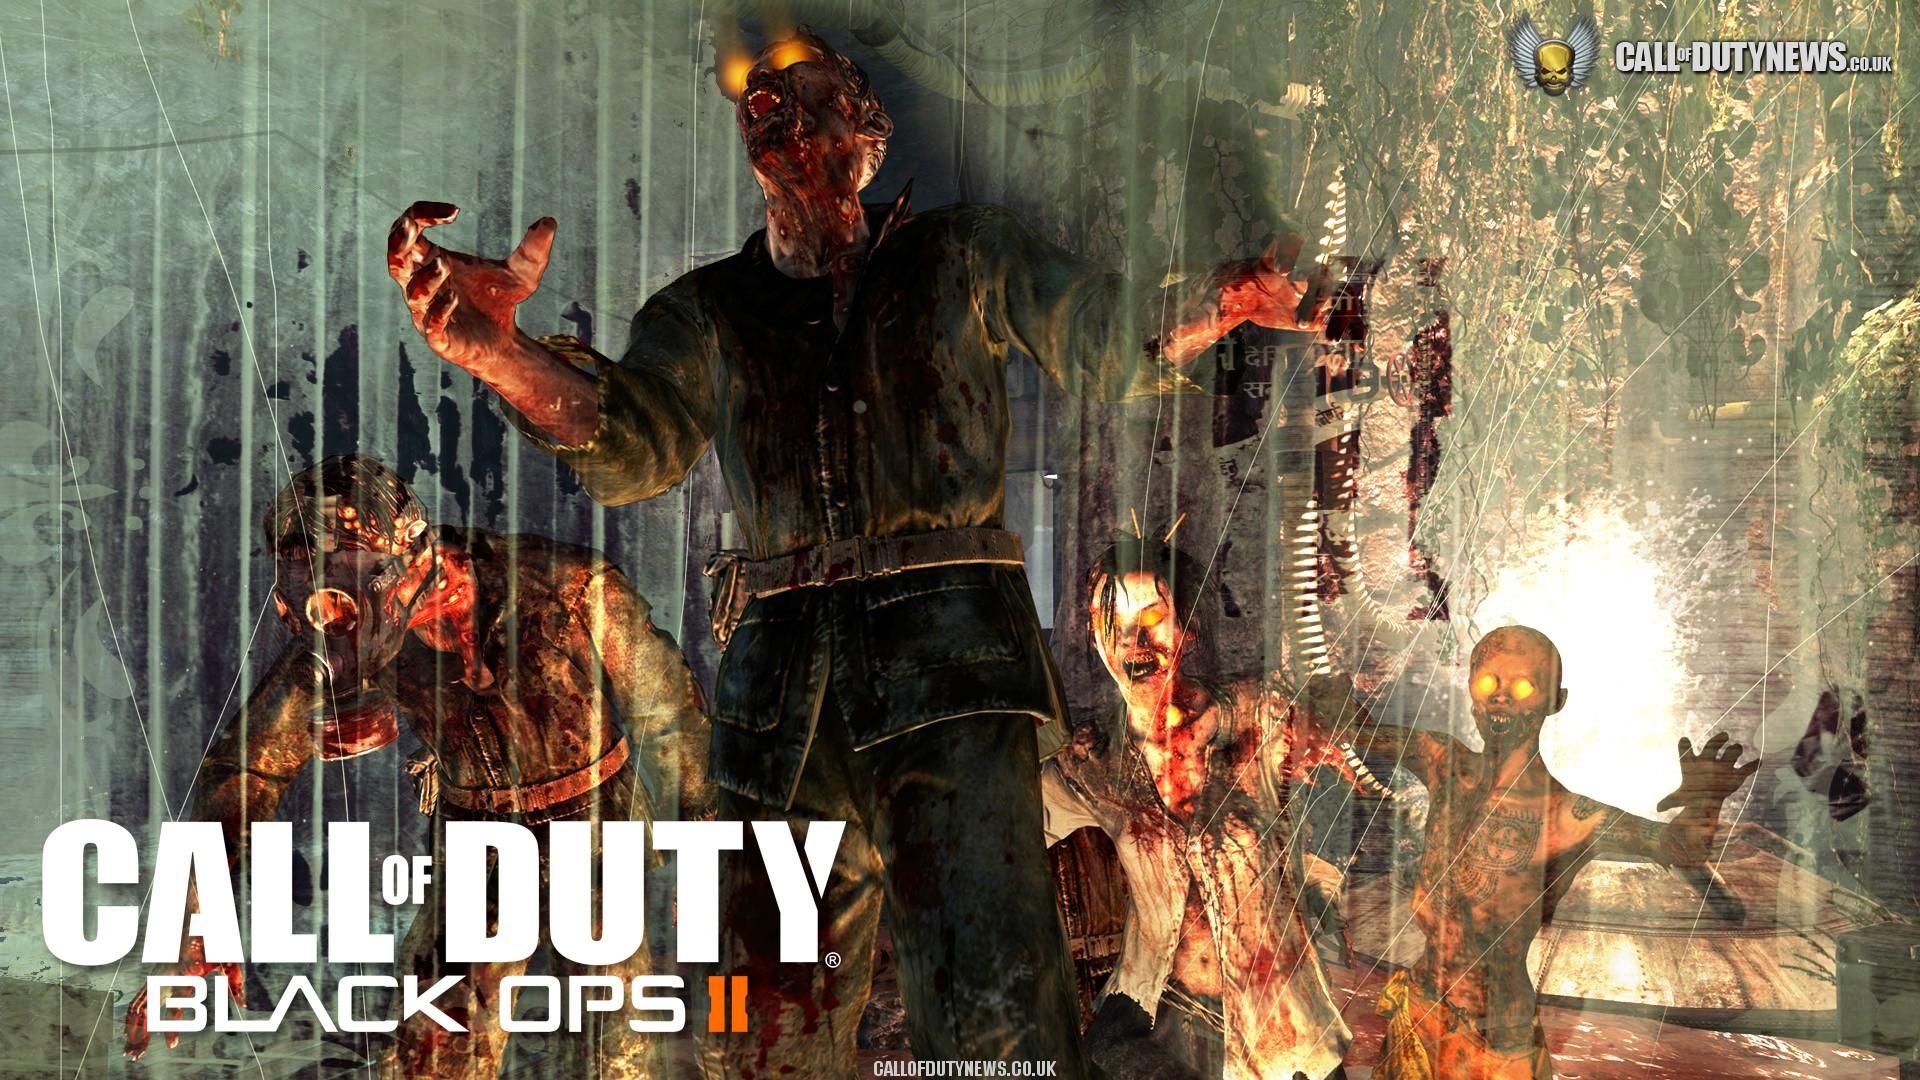 Call Of Duty Black Ops 2 Zombies Wallpaper Of Duty